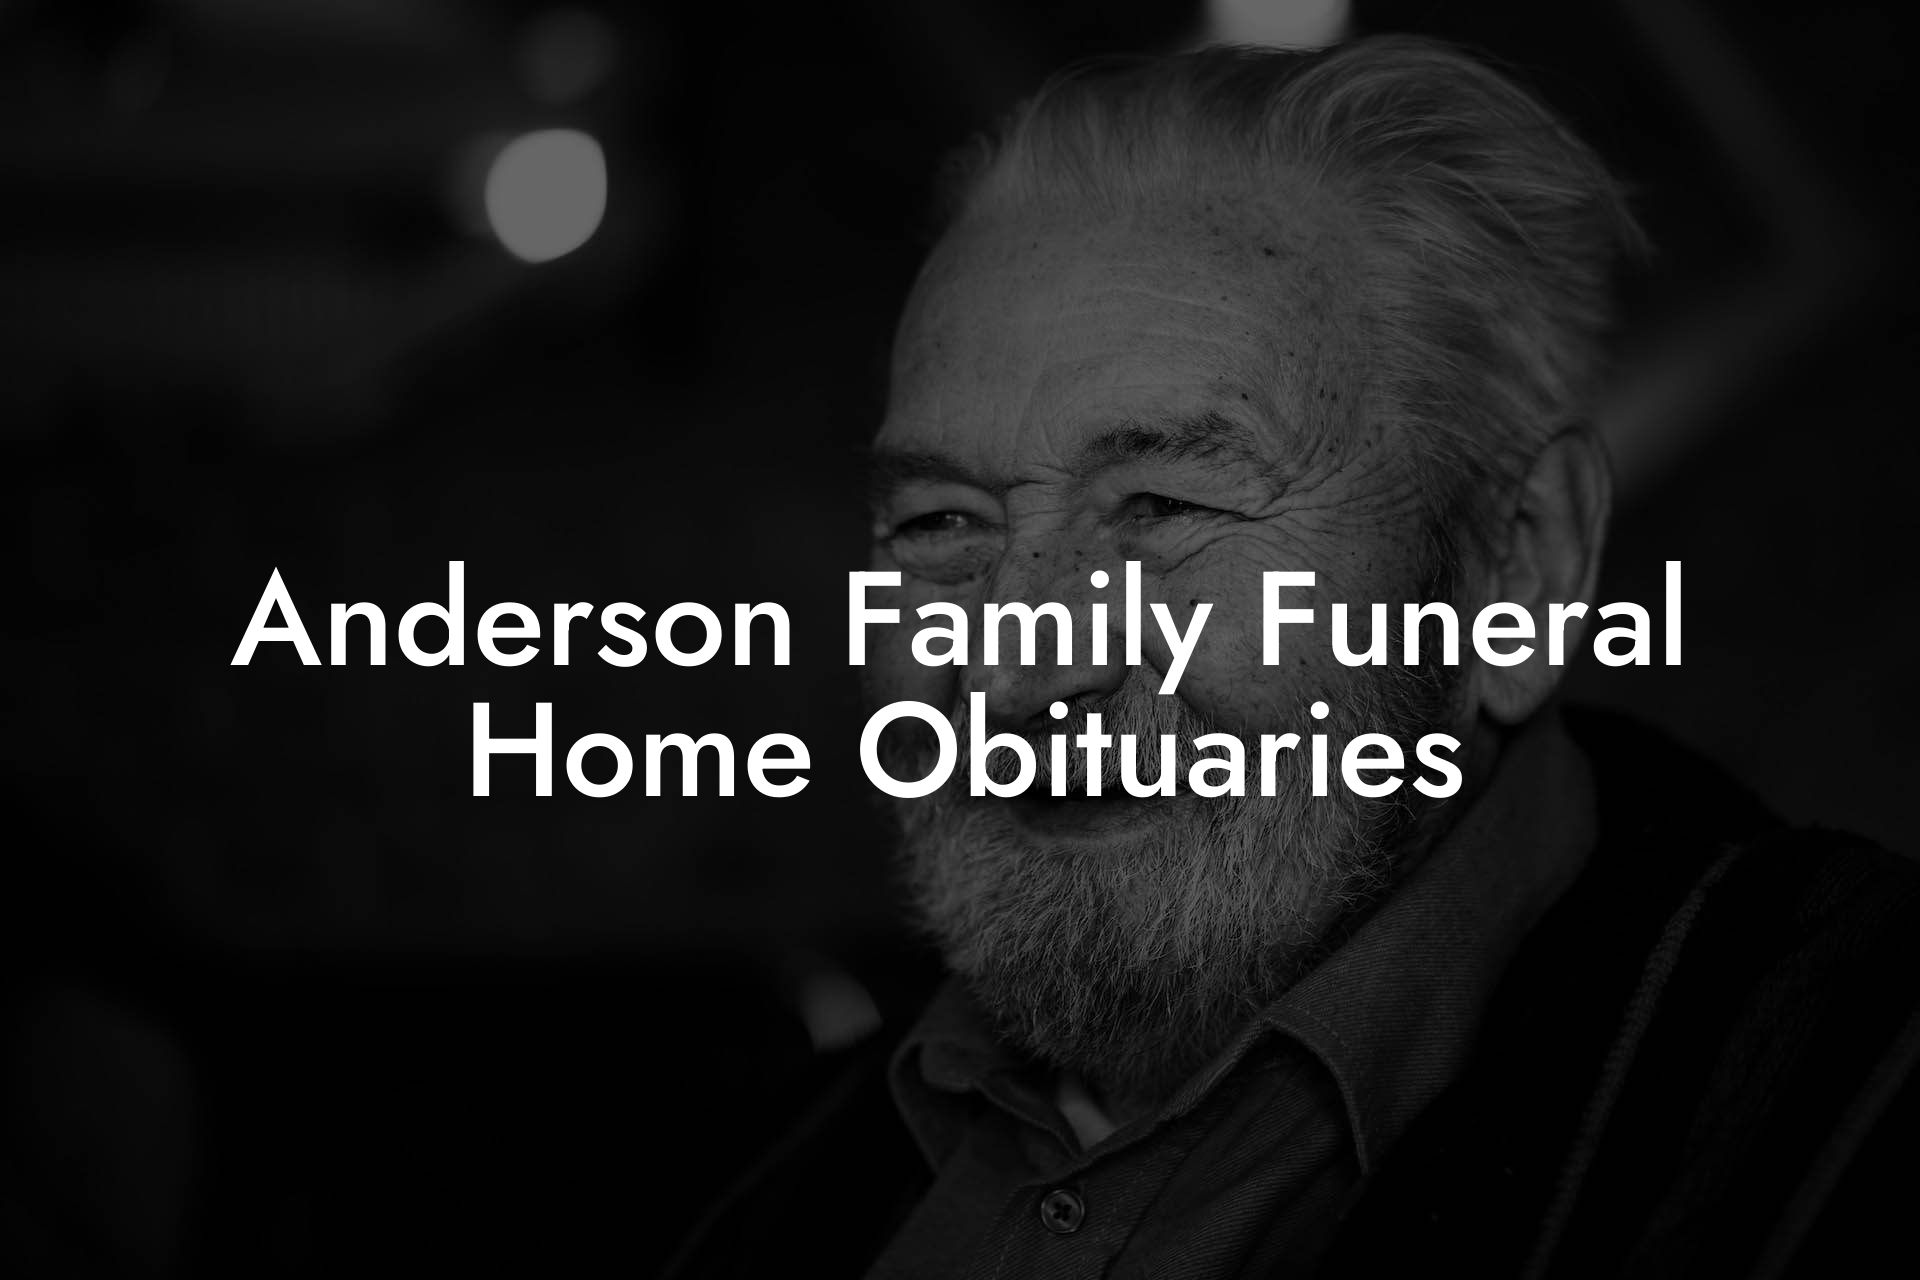 Anderson Family Funeral Home Obituaries